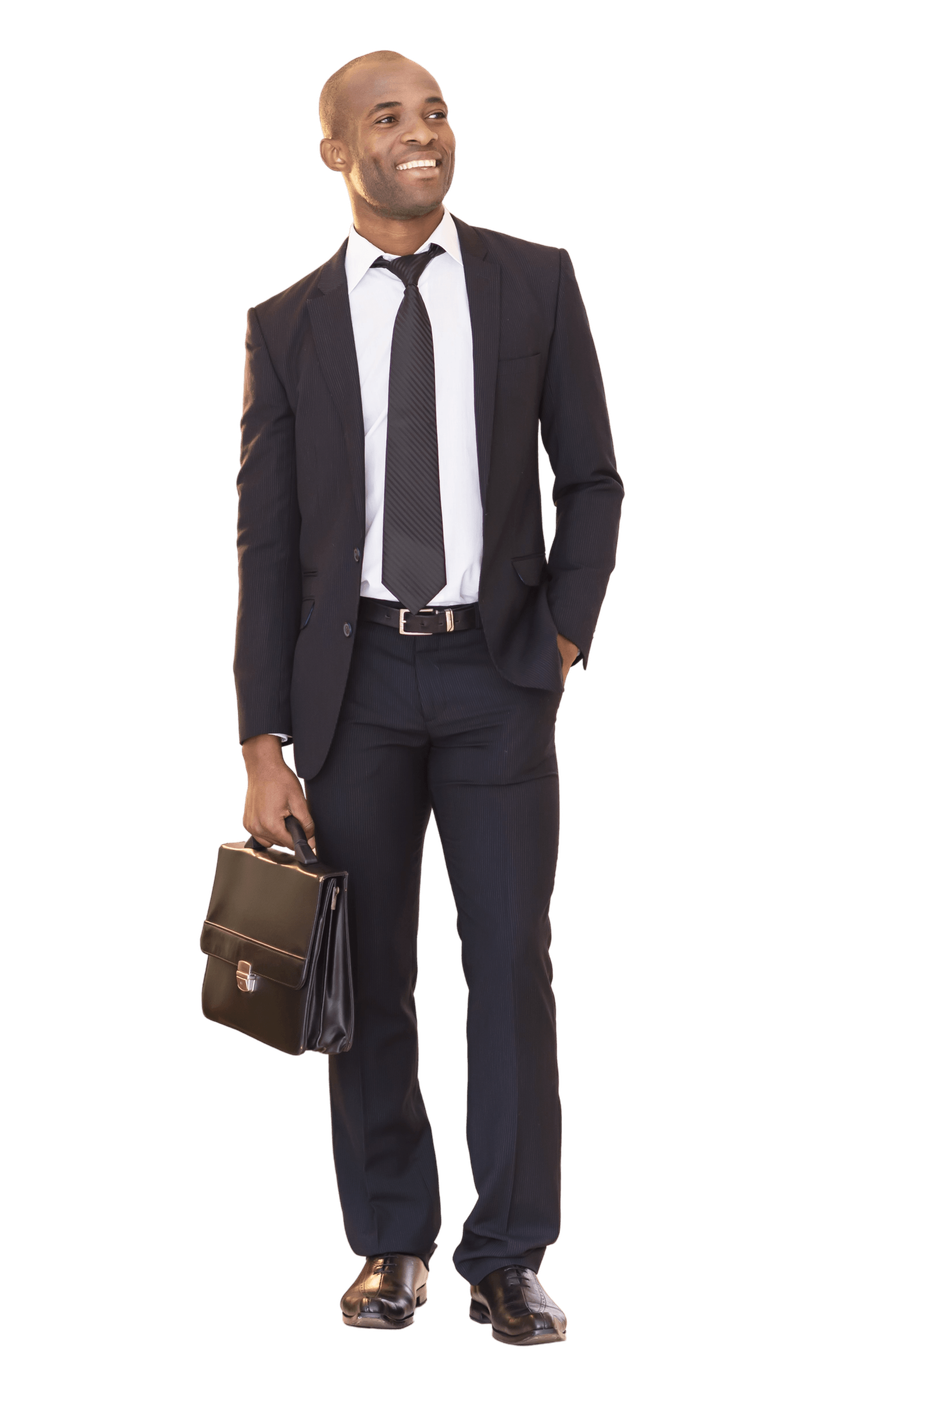 a man in a suit and tie is holding a briefcase .